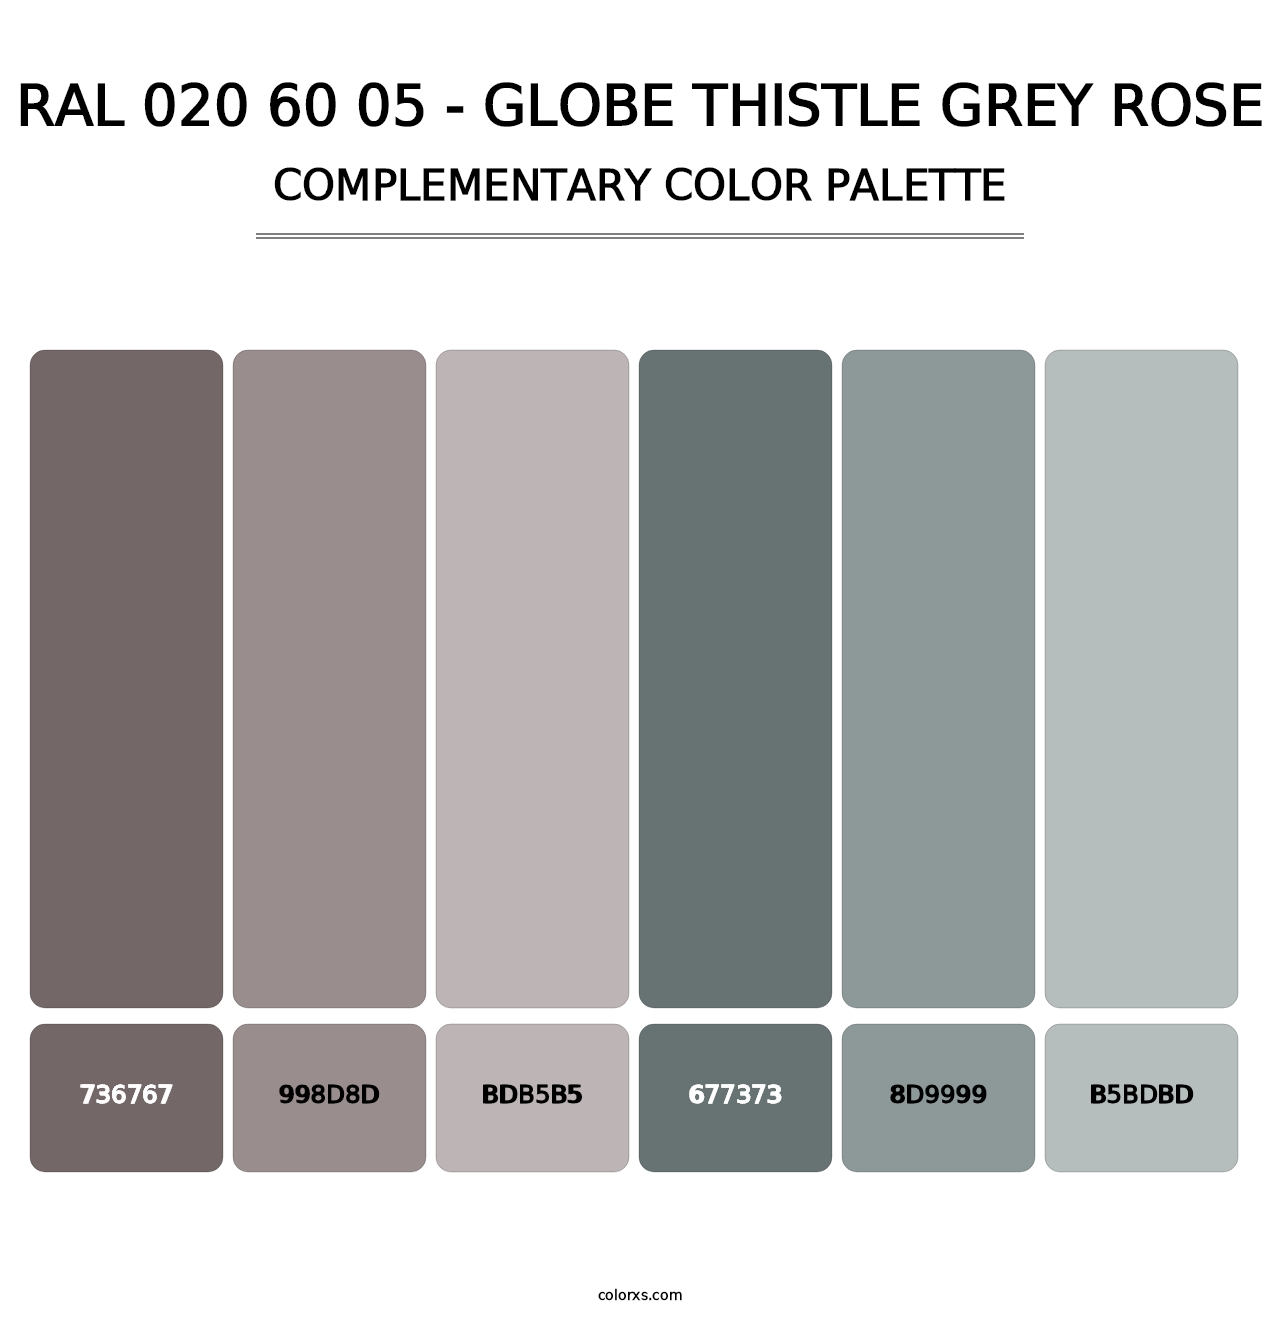 RAL 020 60 05 - Globe Thistle Grey Rose - Complementary Color Palette